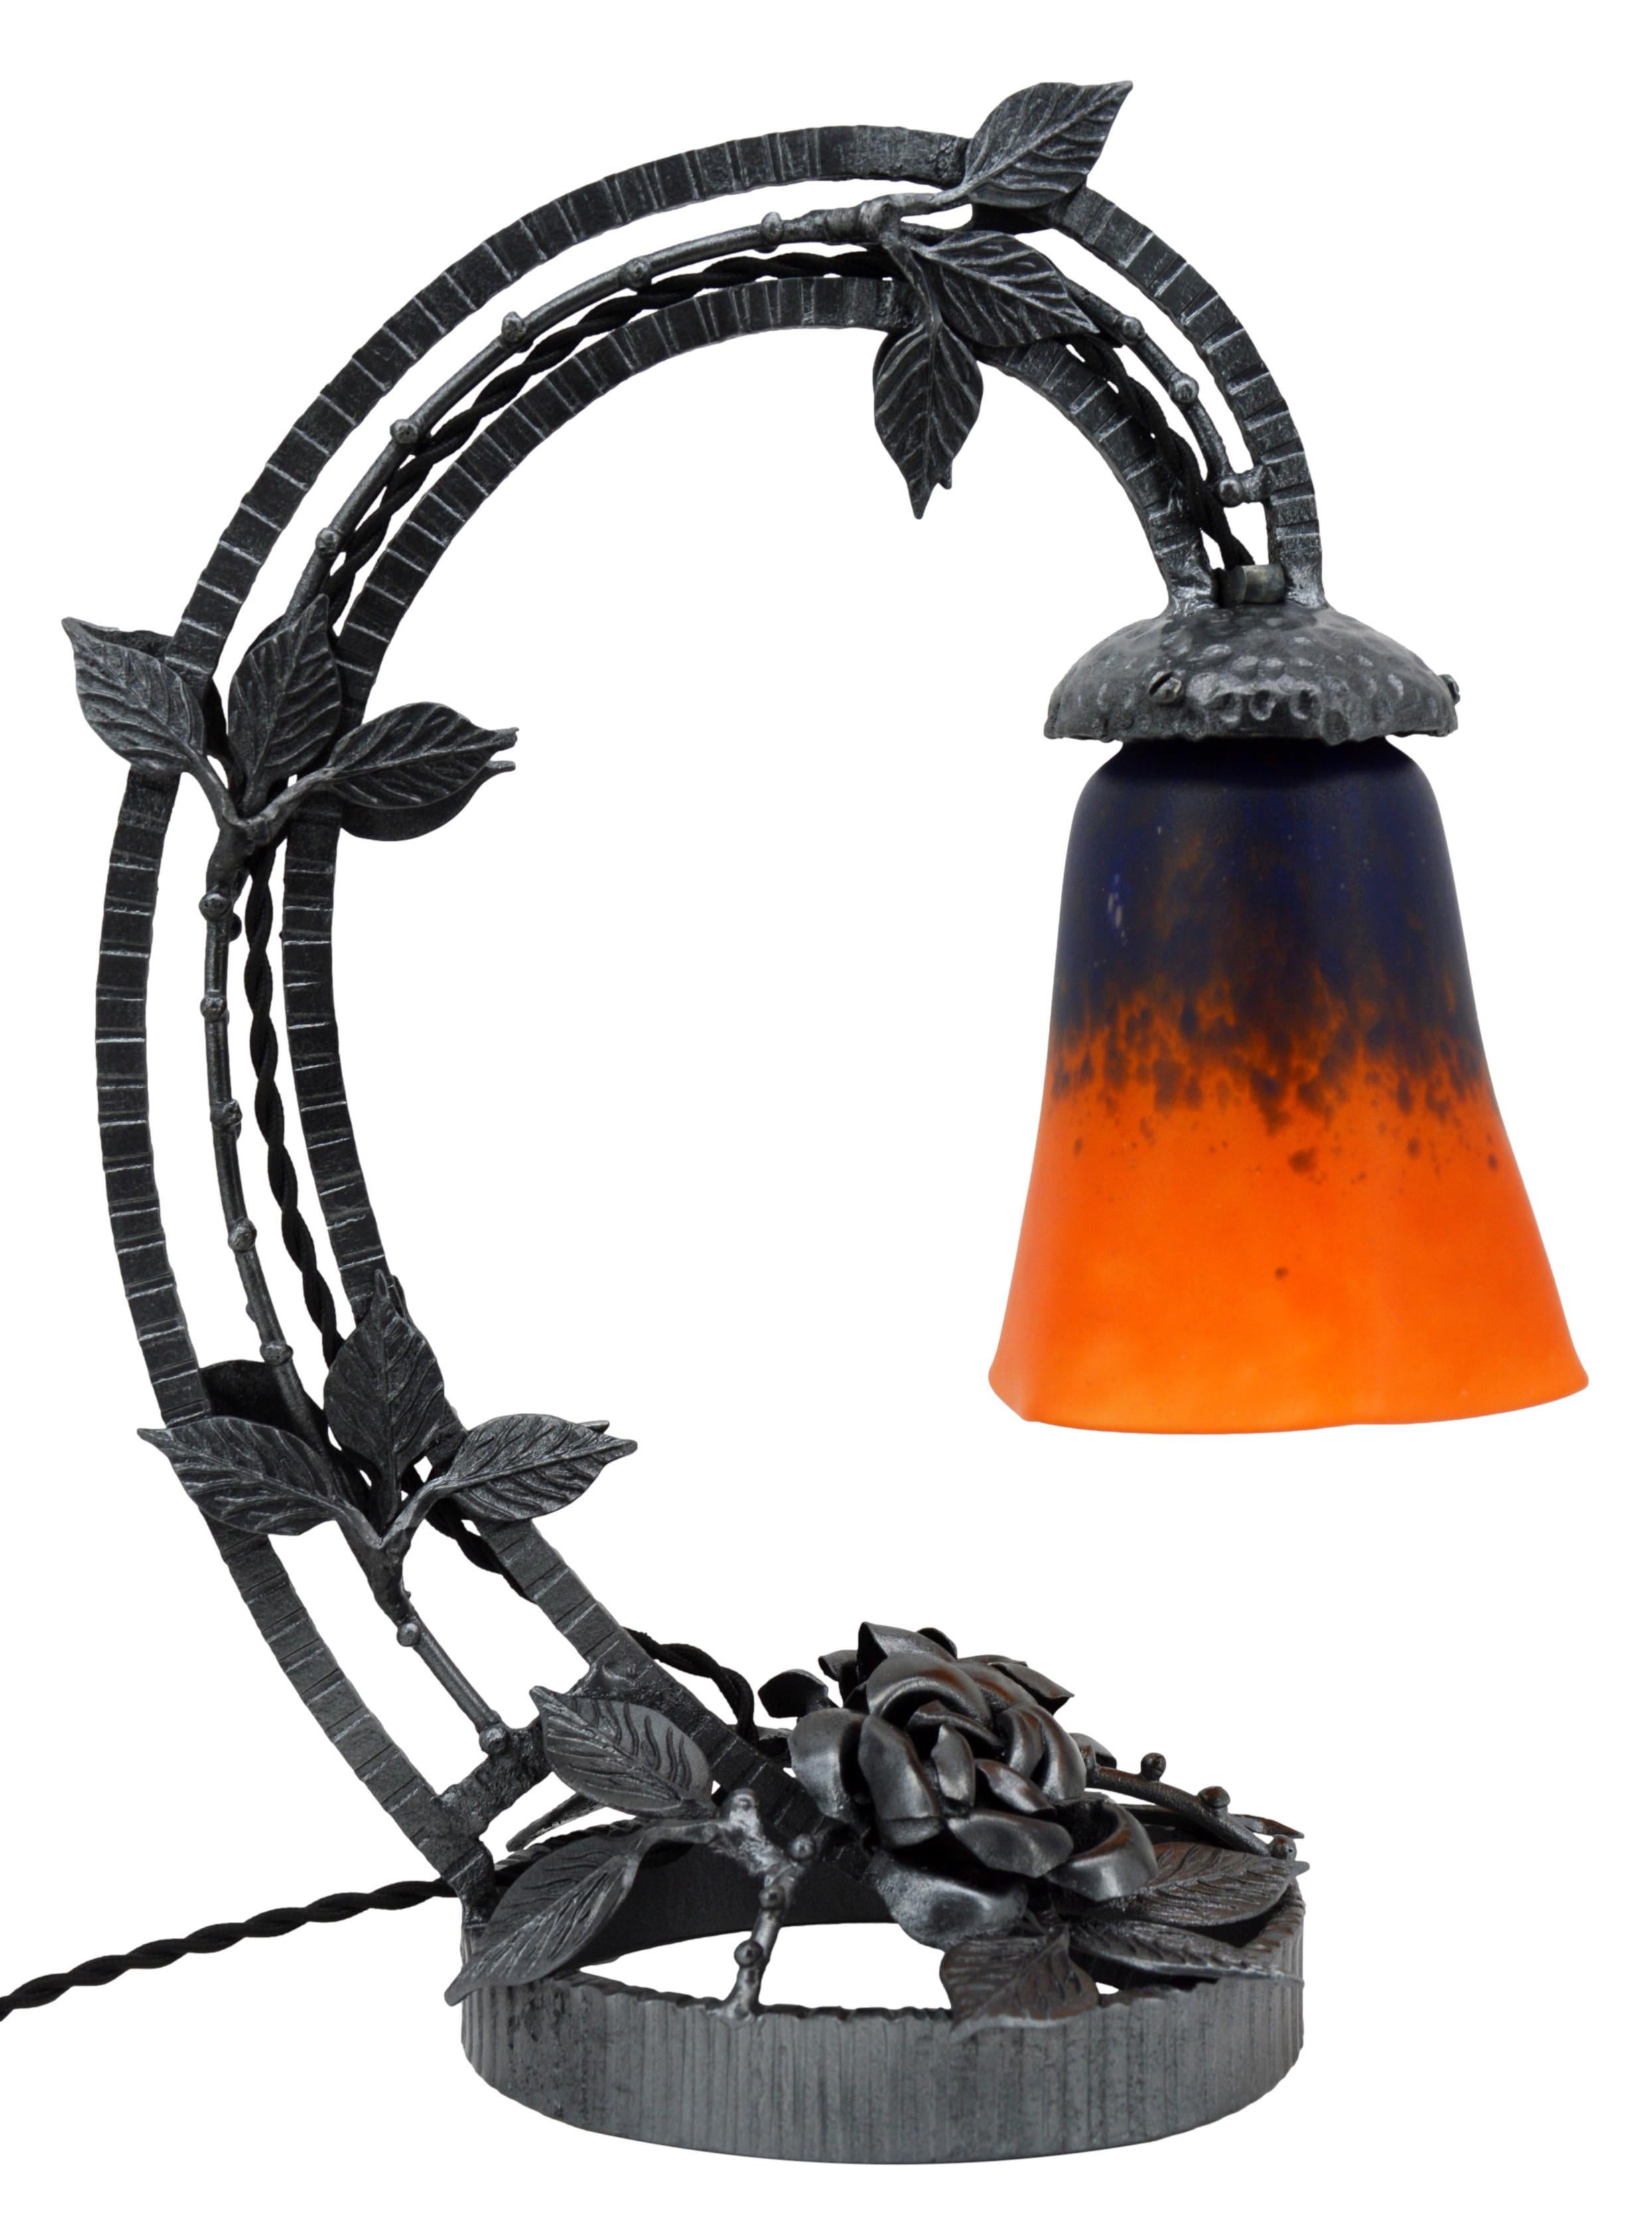 Charles Schneider, French Art Deco Lamp, 1920s For Sale 2